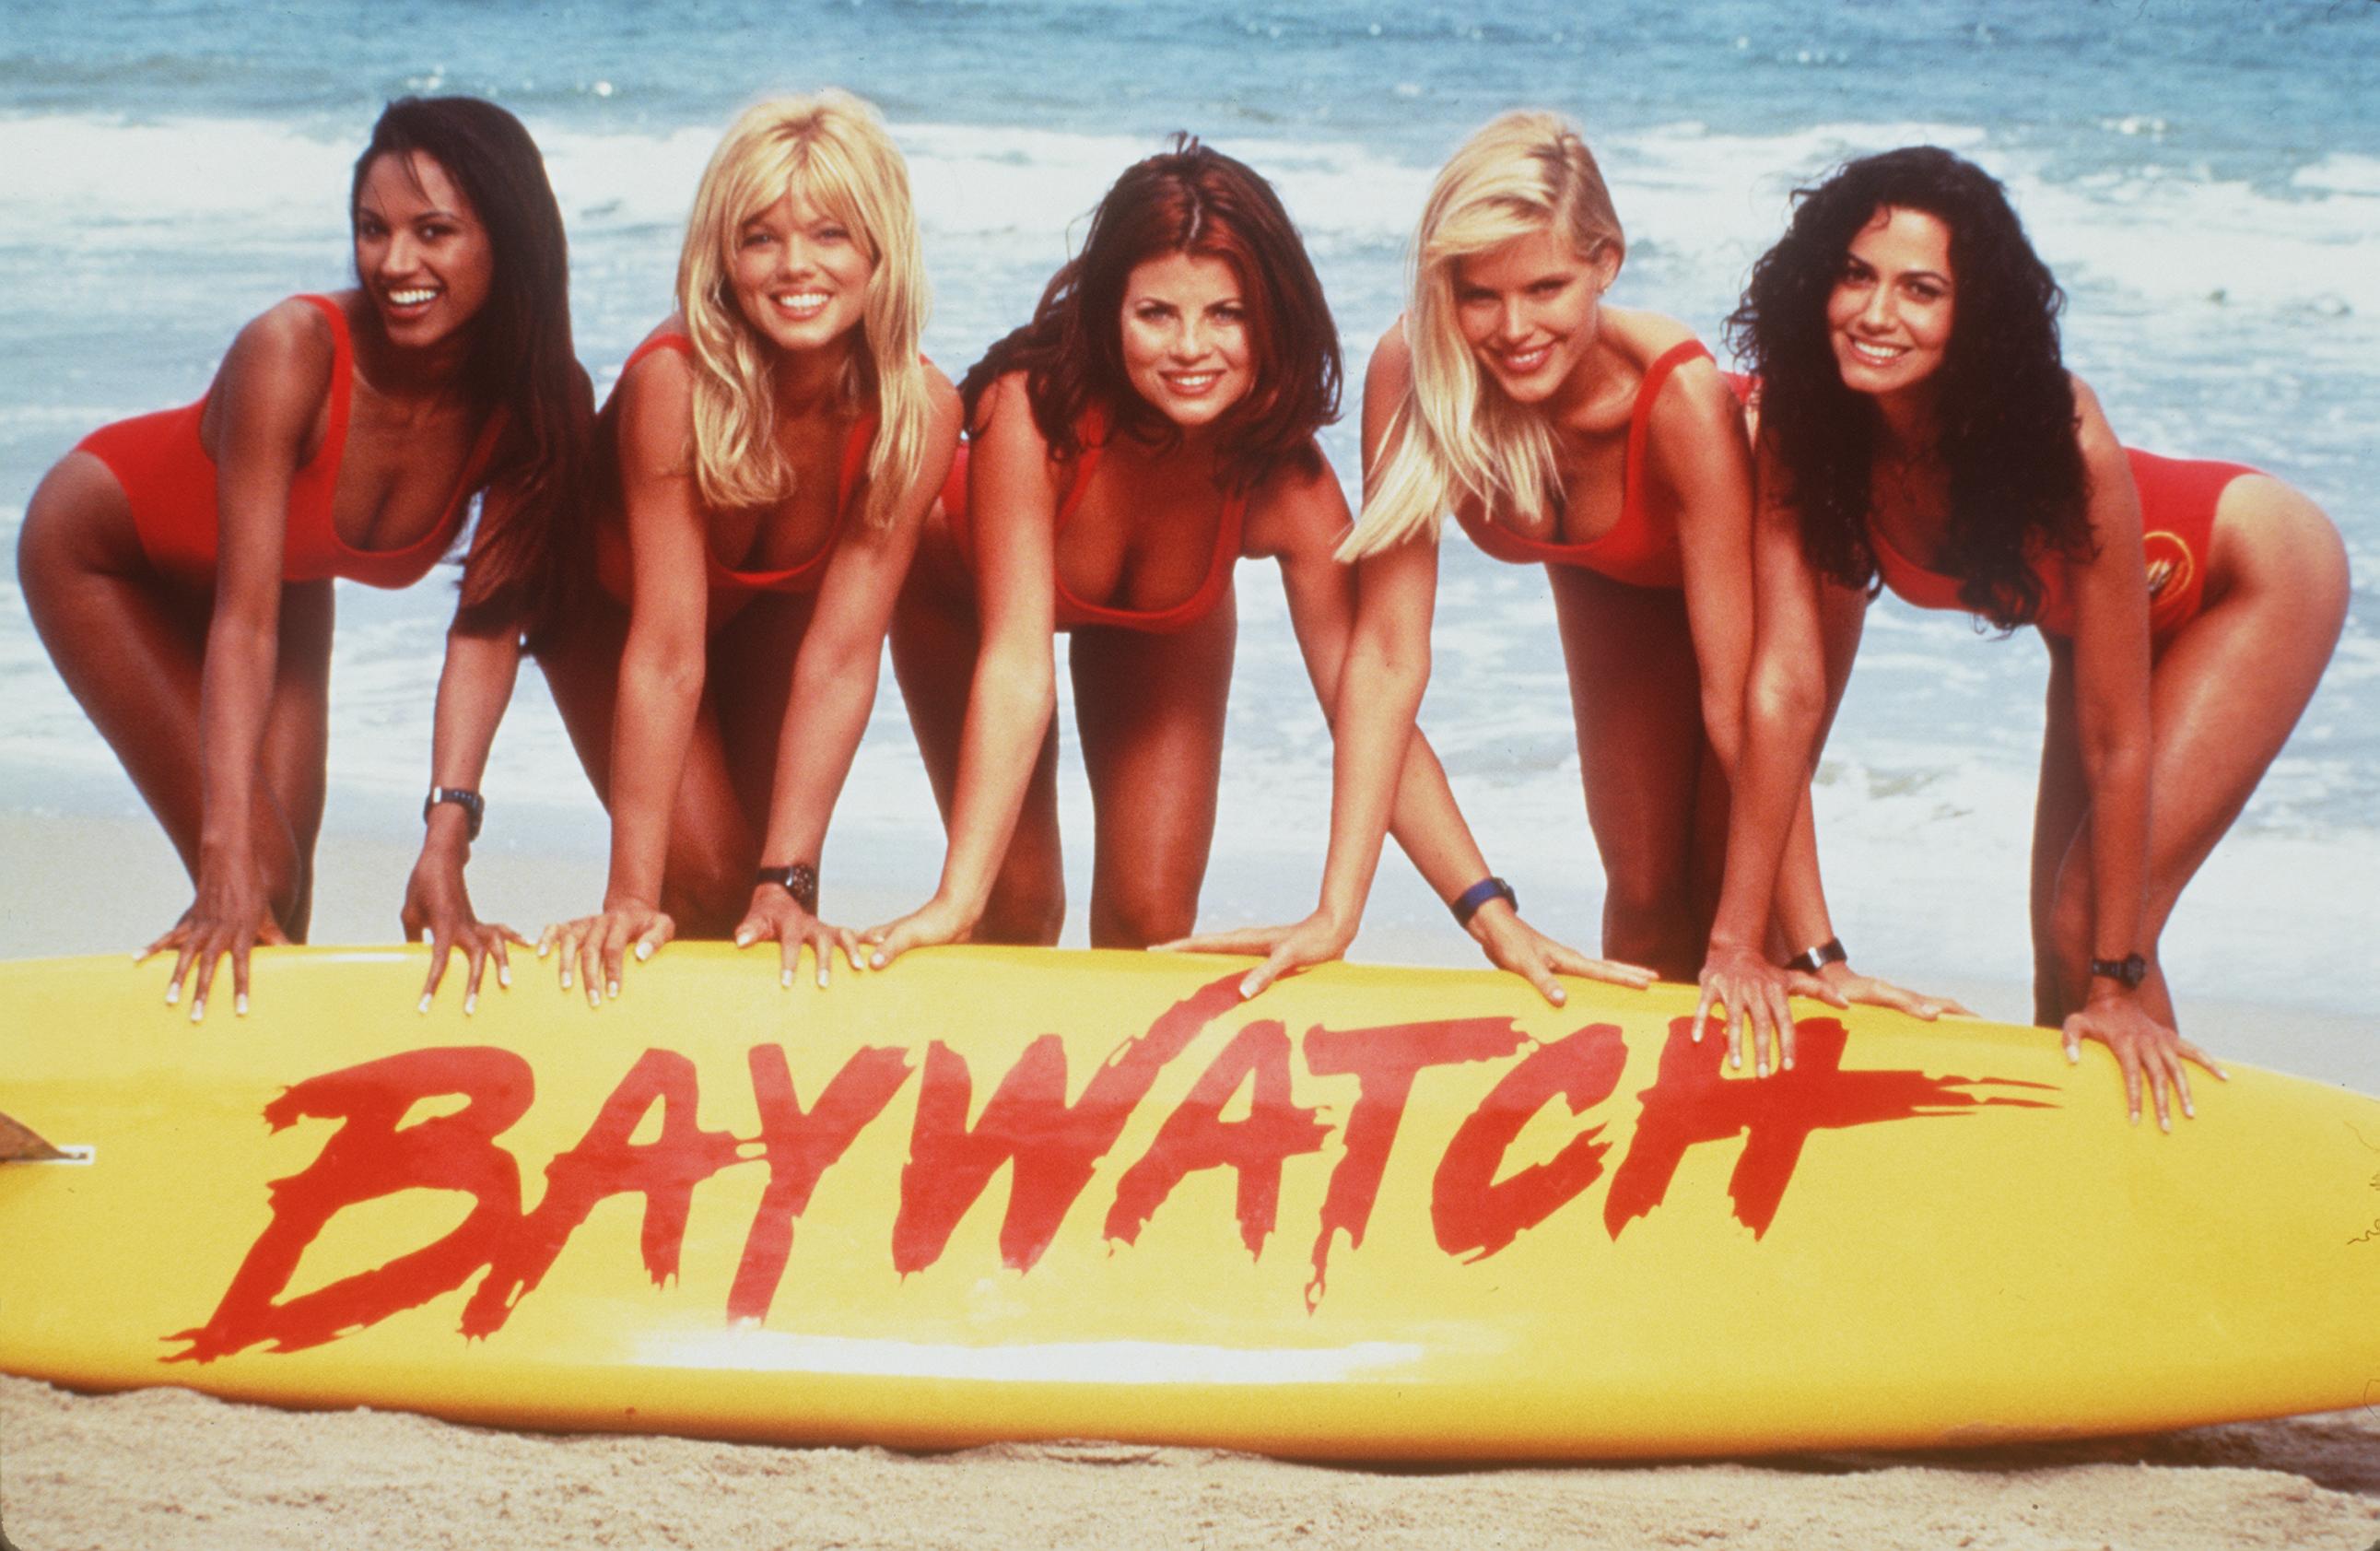 From L-R: Traci Bingham, Donna D'Errico, Yasmine Bleeth, Gena Lee Nolin and Nancy Valen in the set of "Baywatch," 1999 | Source: Getty Images